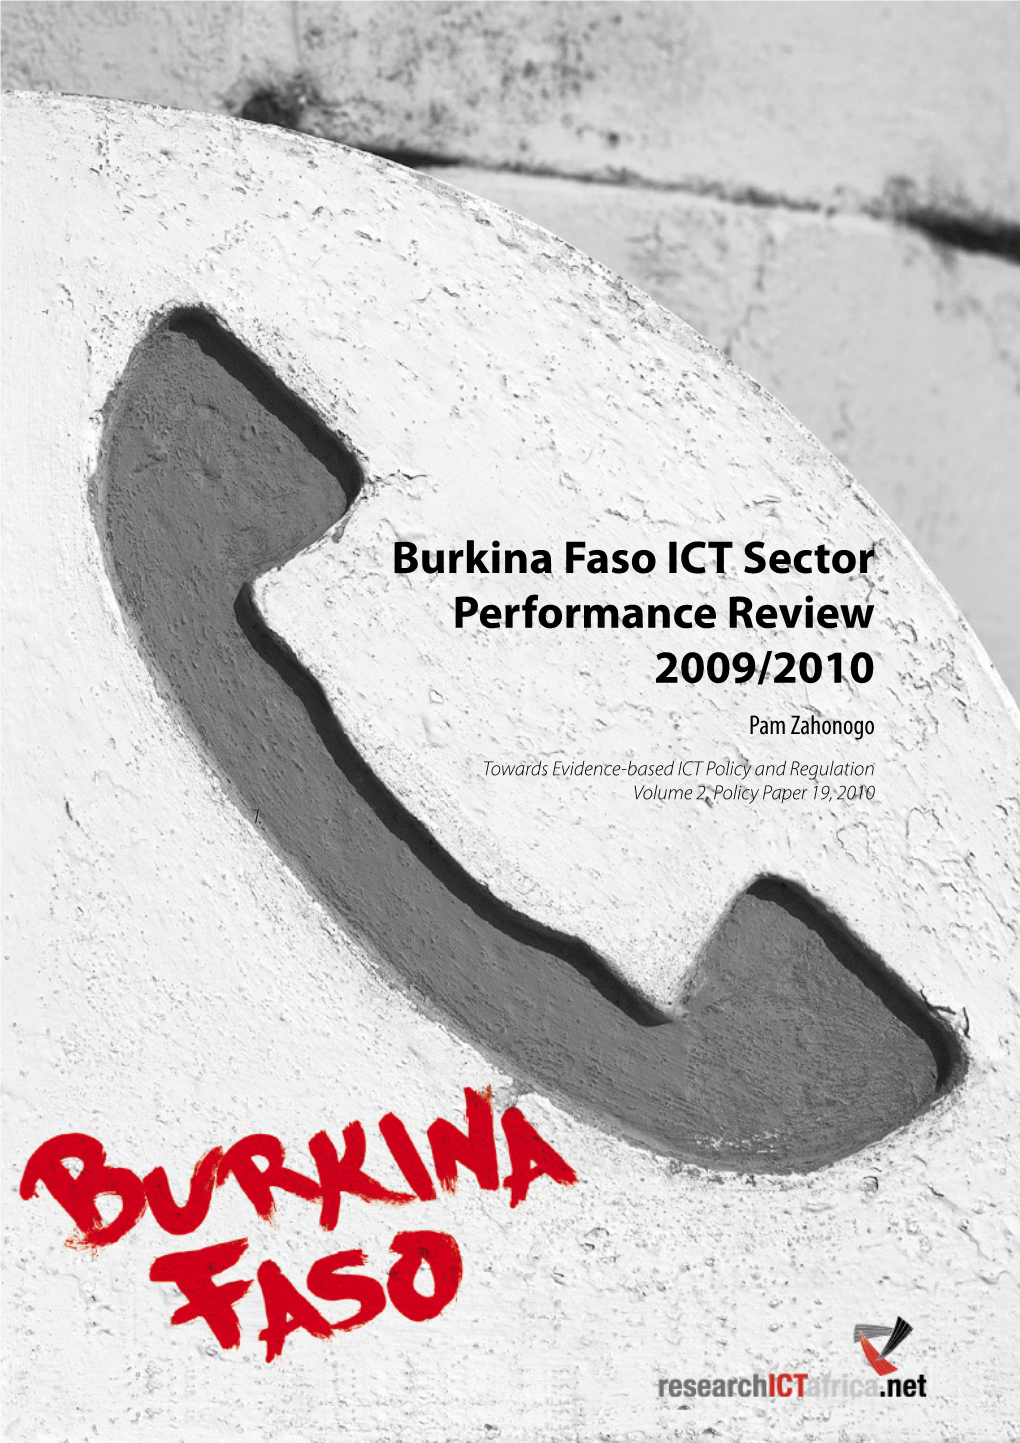 Burkina Faso ICT Sector Performance Review 2010